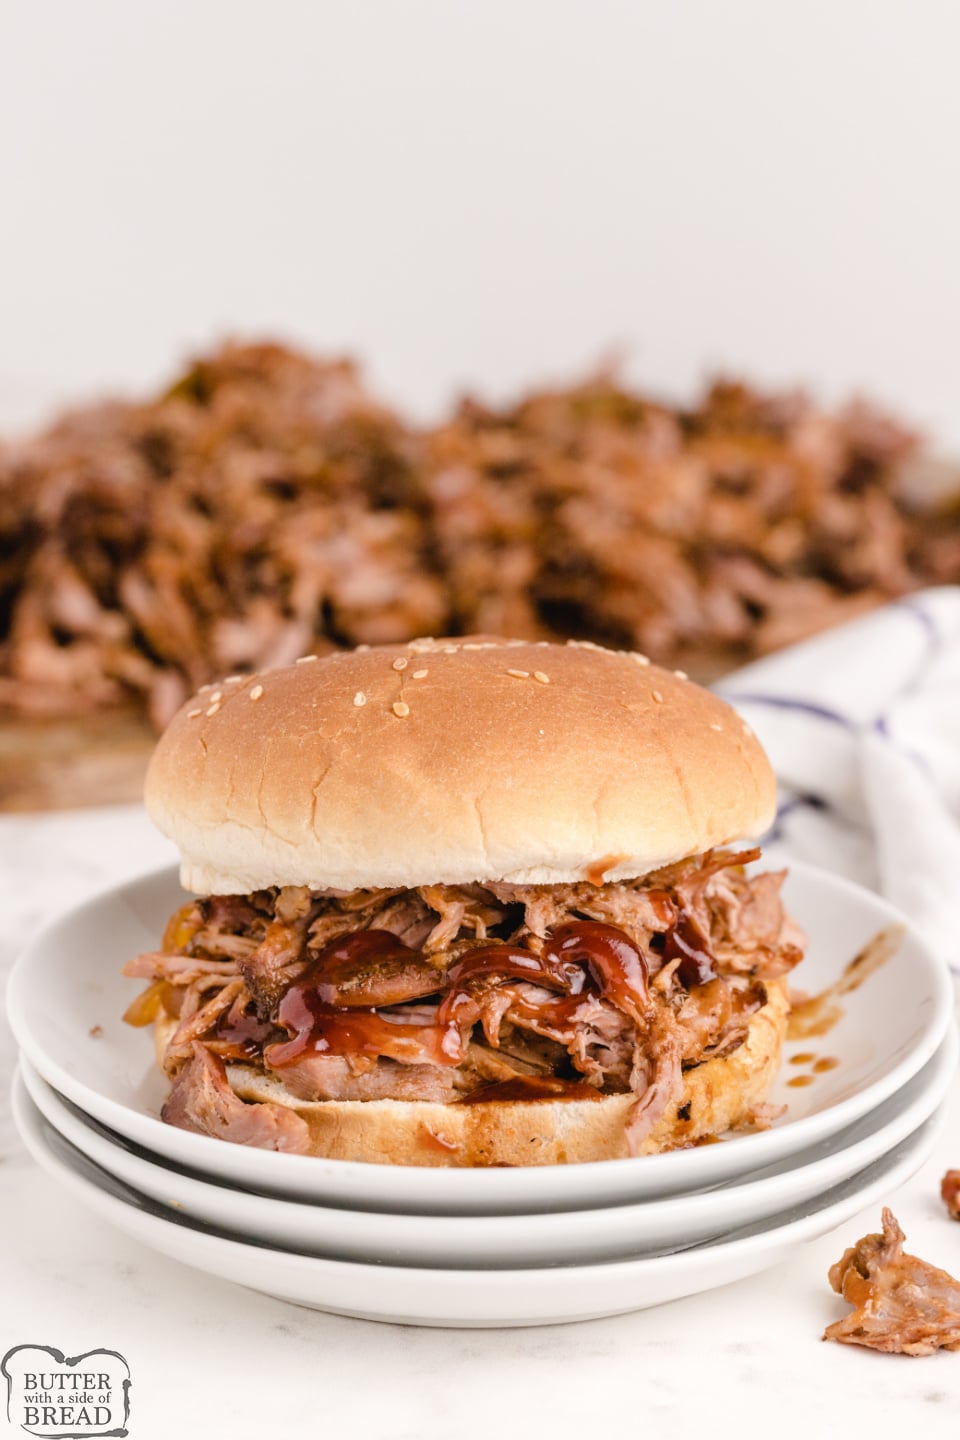 Slow Cooker BBQ Pulled Pork is moist, tender and packed with flavor. This simple crockpot pulled pork recipe is perfect for sandwiches, or even just served over rice.